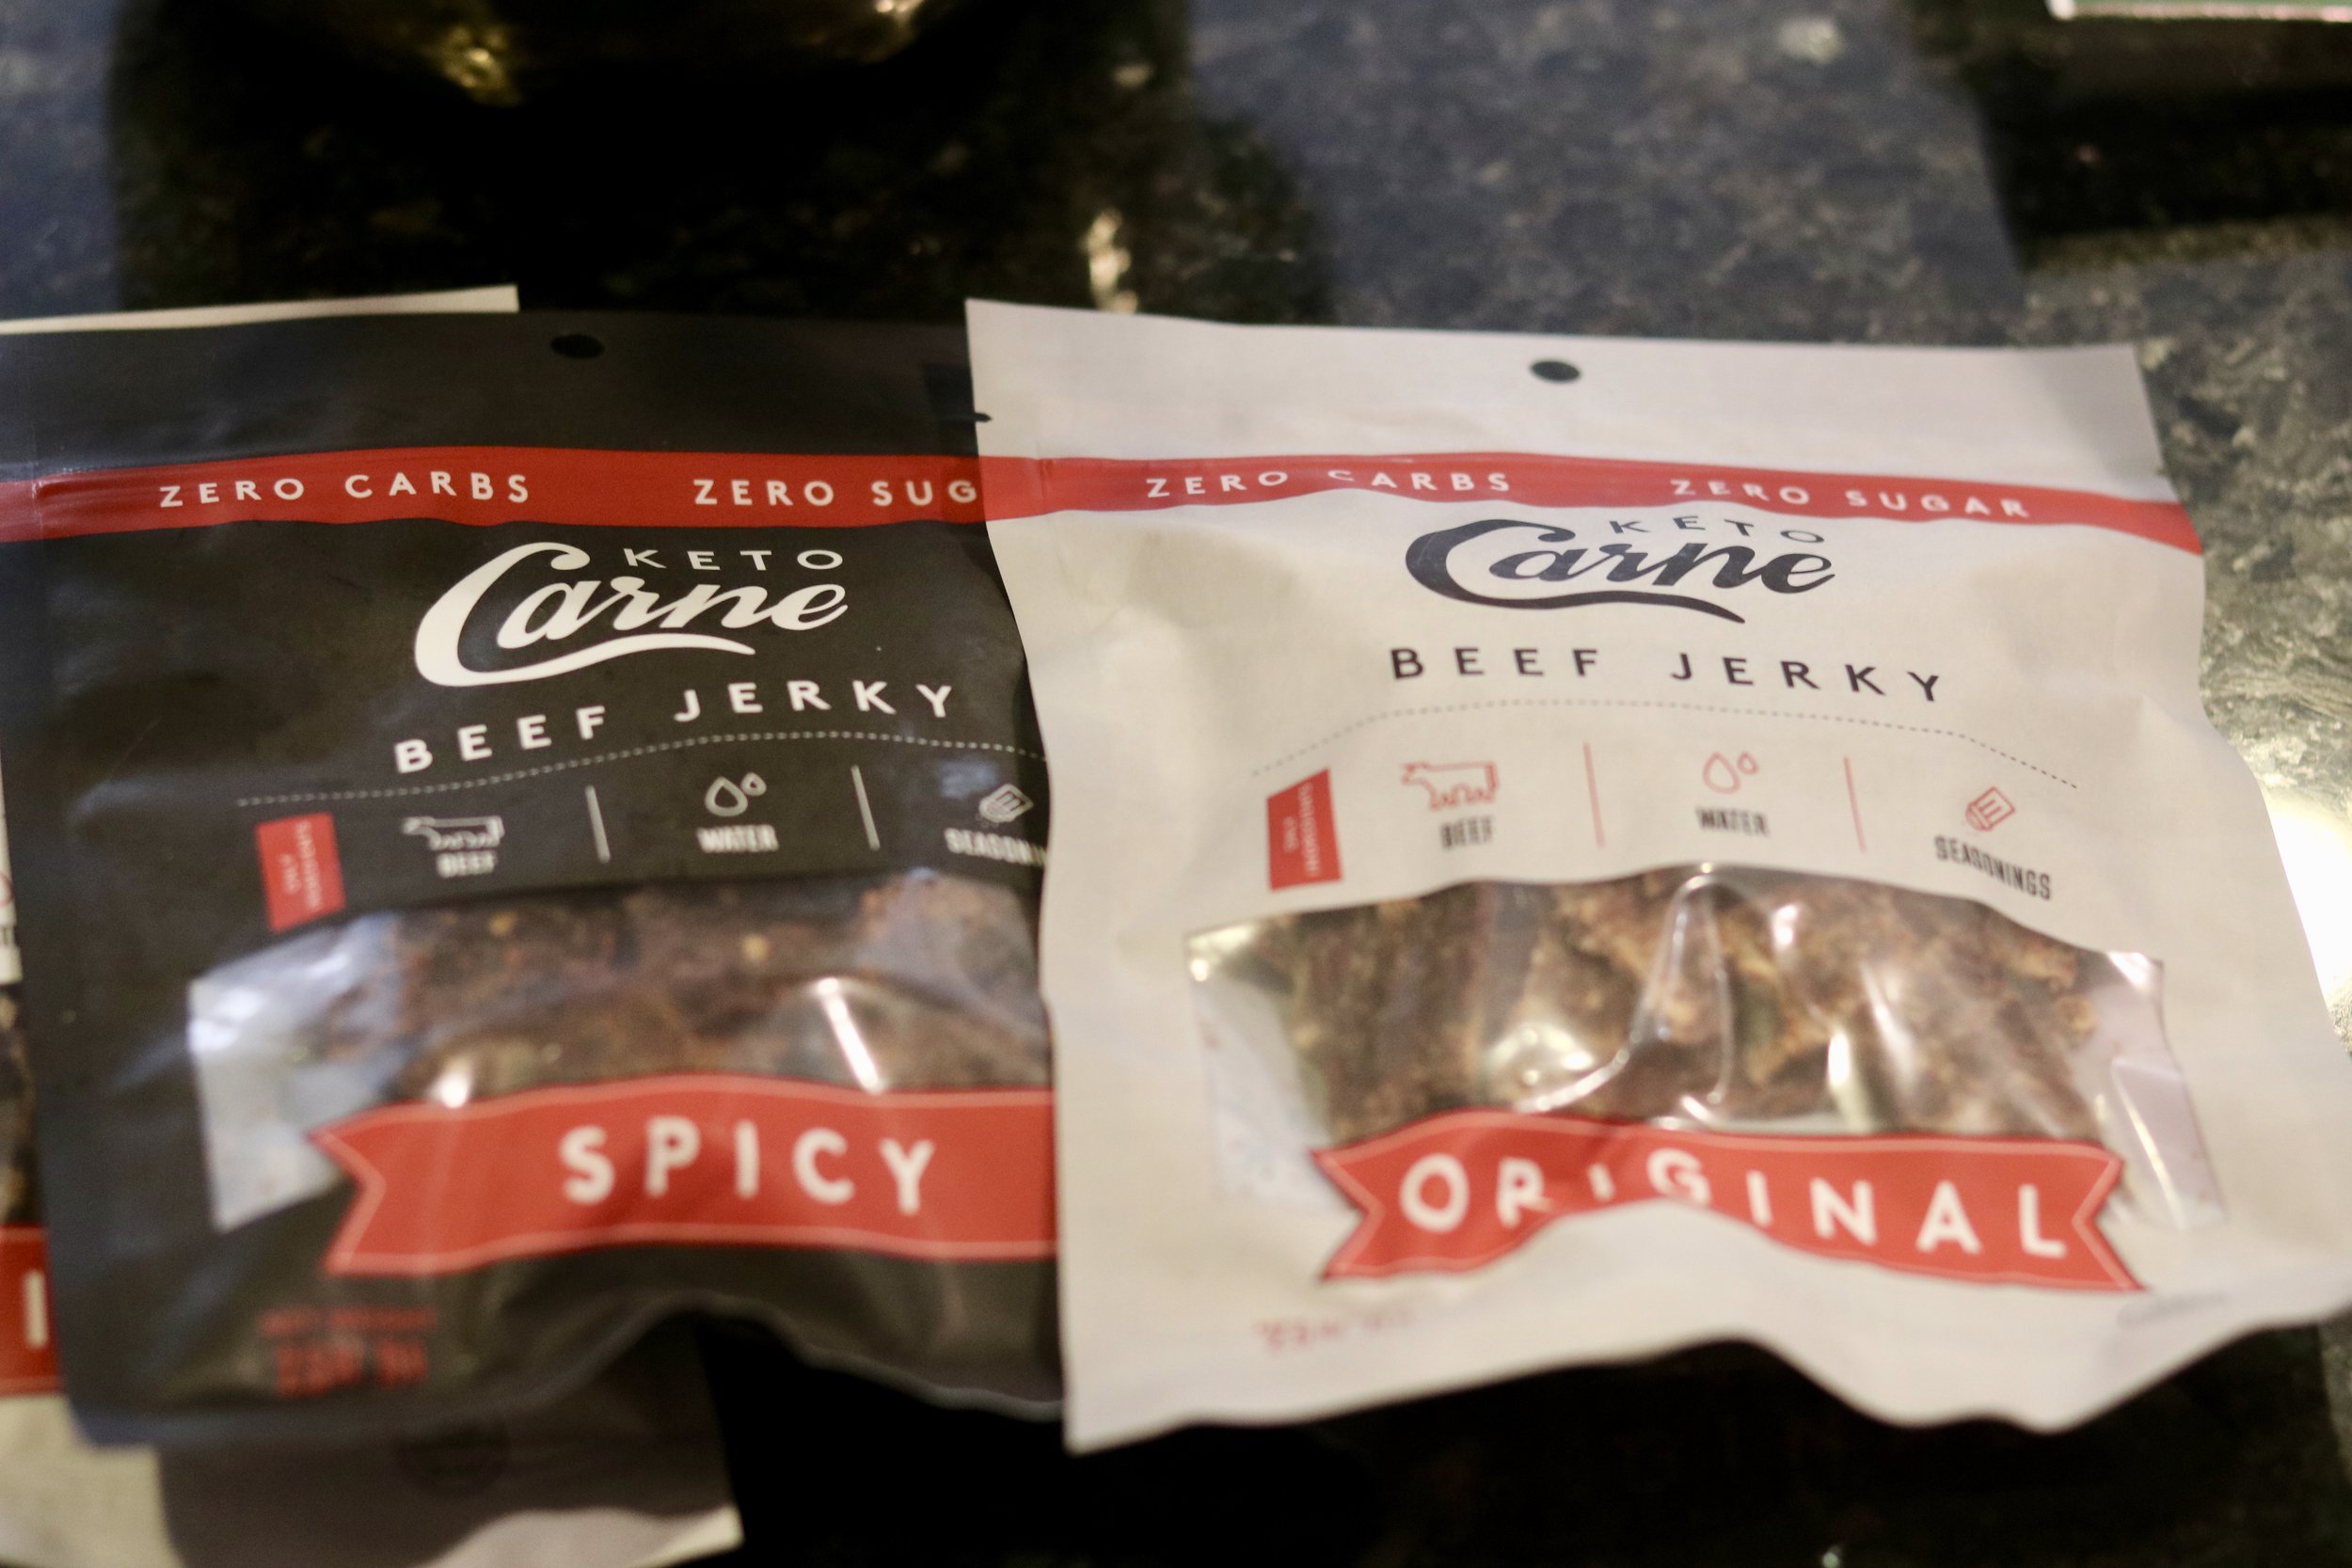 Keto Carne Beef Jerk, a no-carb snack replacement